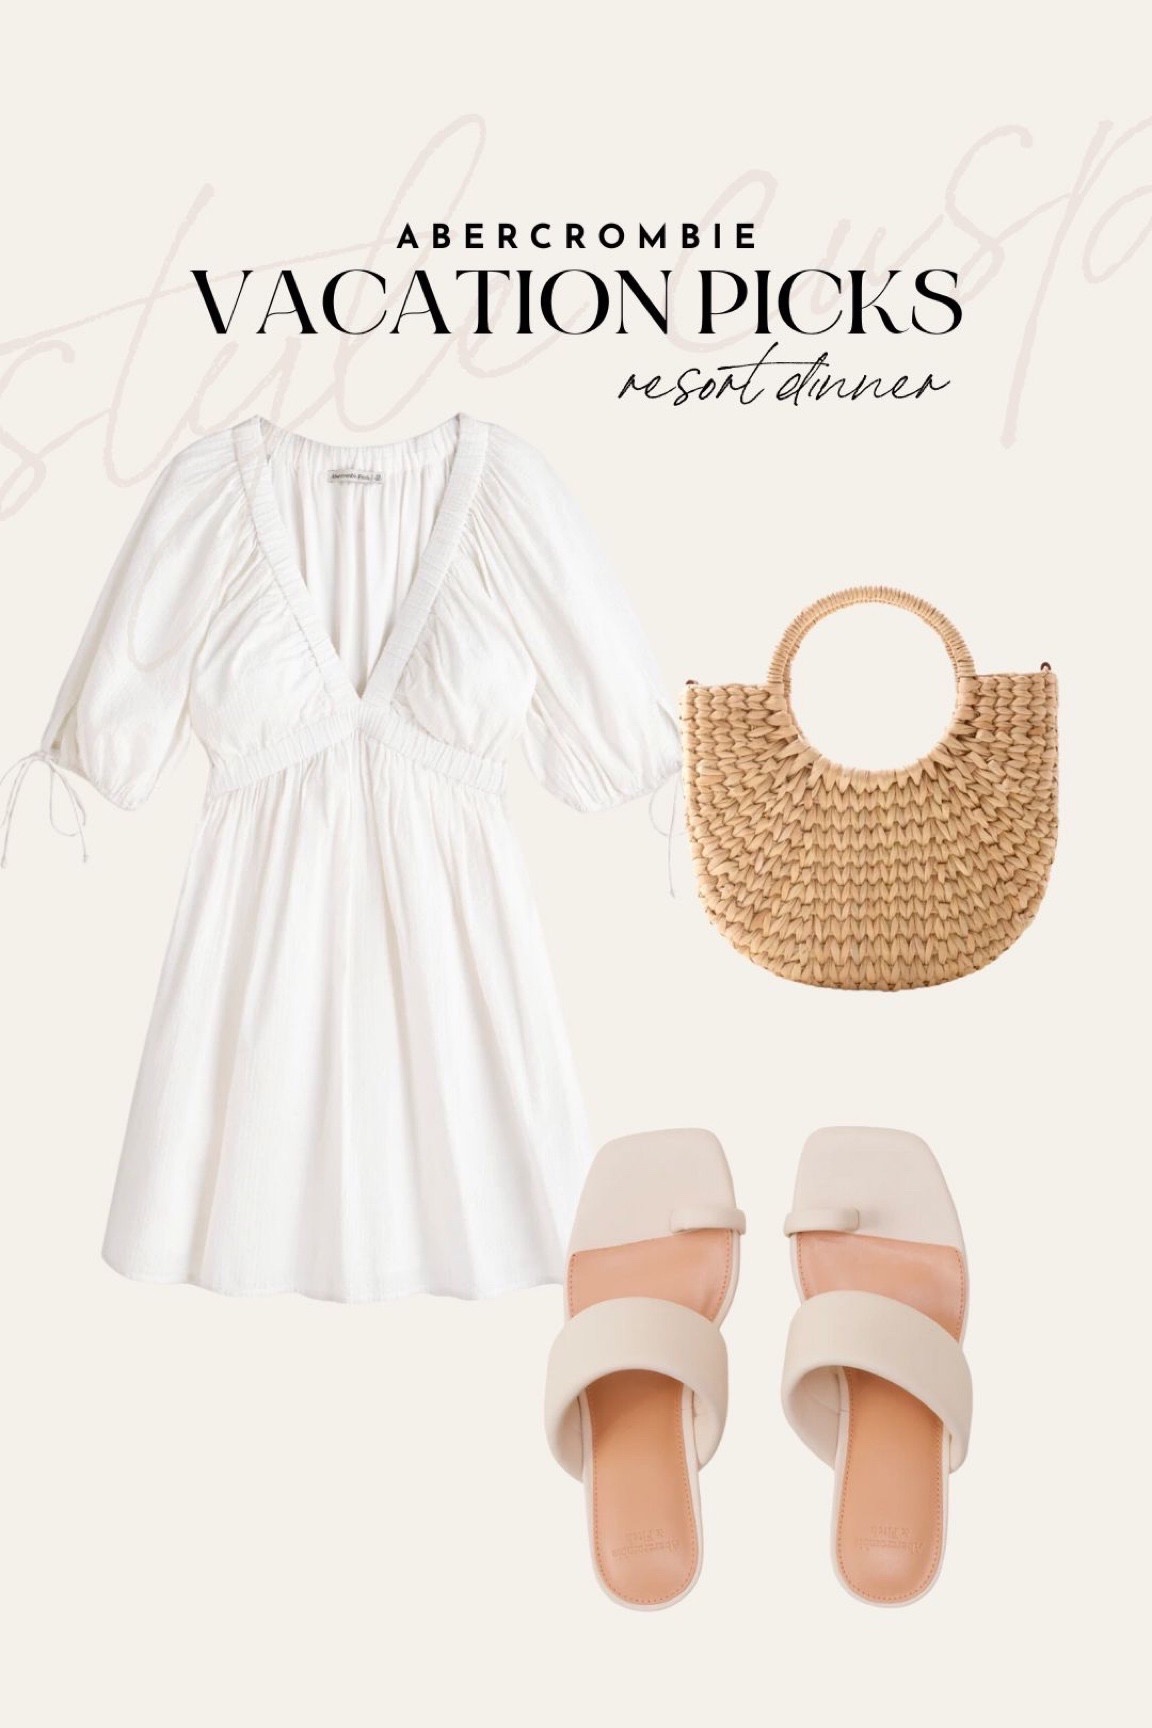 Abercrombie Vacation Outfits and Resort Wear looks